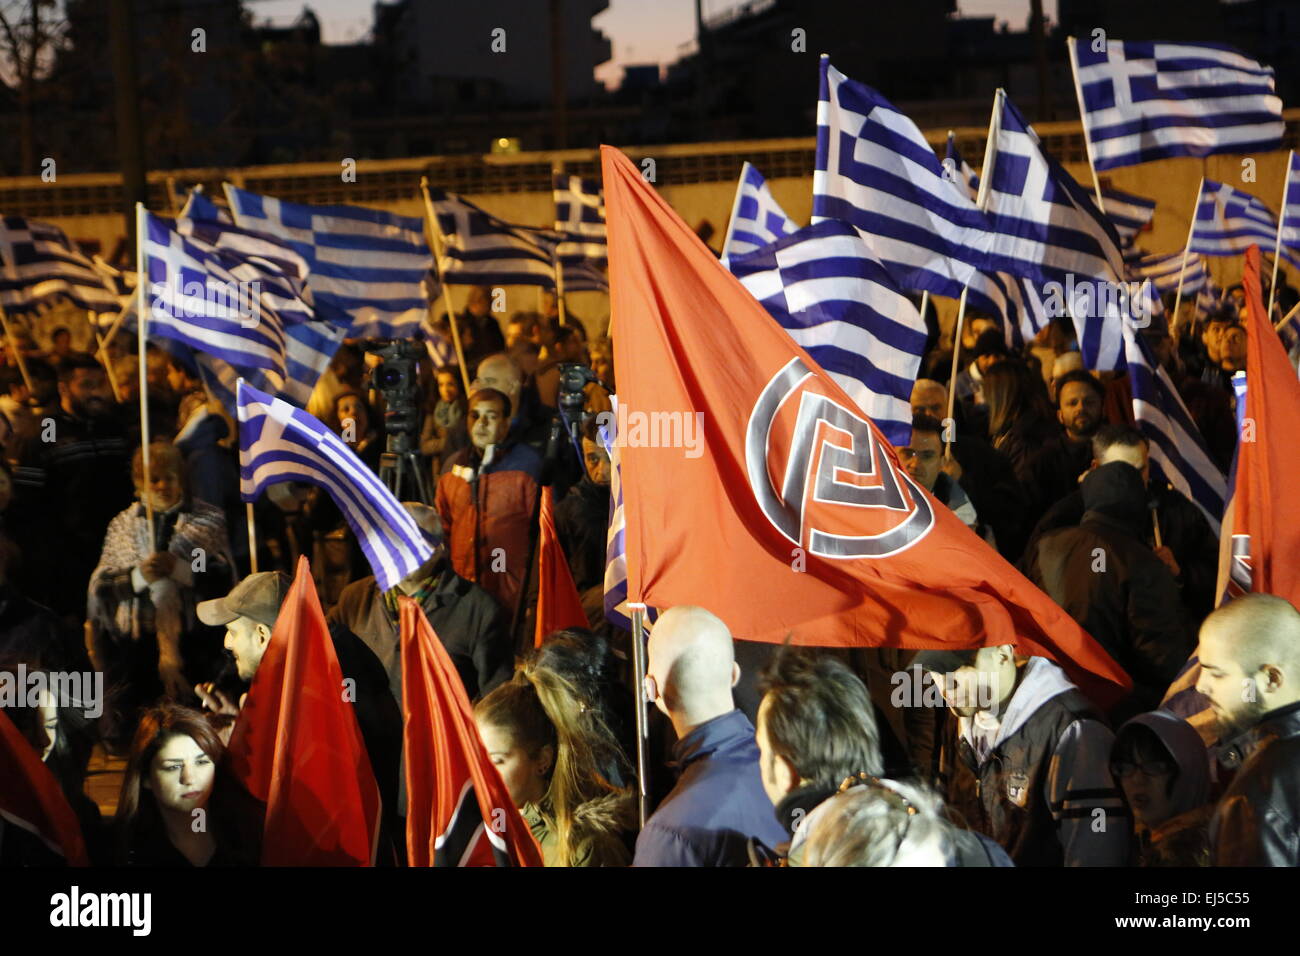 Athens, Greece. 21st Mar, 2015. Greek and Golden Dawn flags fly at the Golden Dawn rally. Greek right wing party Golden Dawn held an anti immigration rally on the International Day against Racism in Athens. © Michael Debets/Pacific Press/Alamy Live News Stock Photo